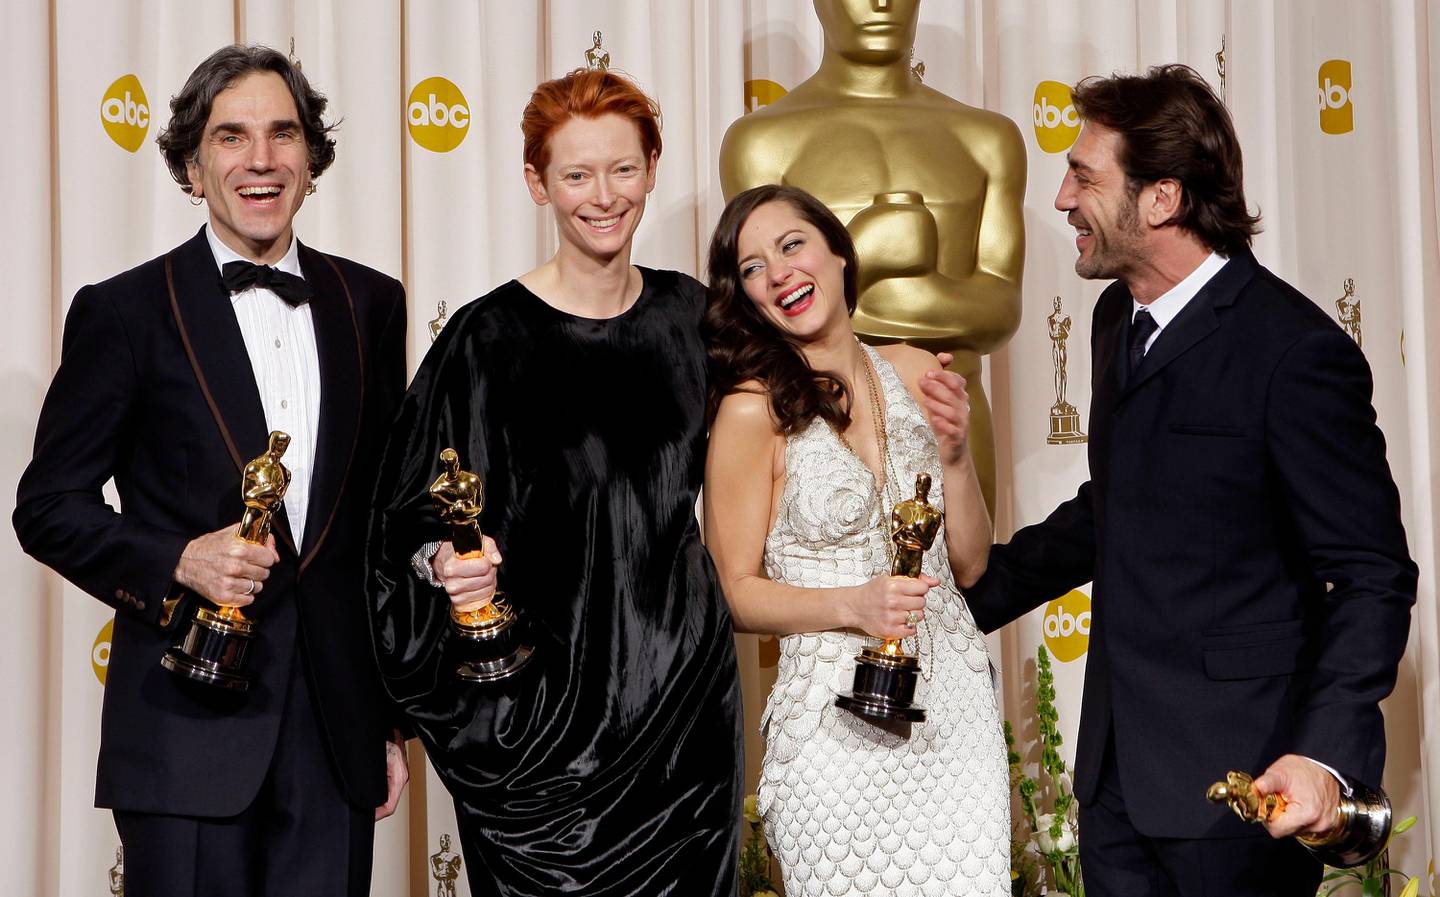 From left, British actor Daniel Day-Lewis poses with the Oscar for best actor for his work in "There Will Be Blood," British actress Tilda Swinton poses with the Oscar for best supporting actress for her work in "Michael Clayton," French actress Marion Cotillard poses with the Oscar for best actress for her work in "La Vie en Rose," and Spanish actor Javier Bardem poses with the Oscar for best supporting actor for his work in "No Country for Old Men" at the 80th Academy Awards Sunday, Feb. 24, 2008, in Los Angeles.(AP Photo/Kevork Djansezian) 